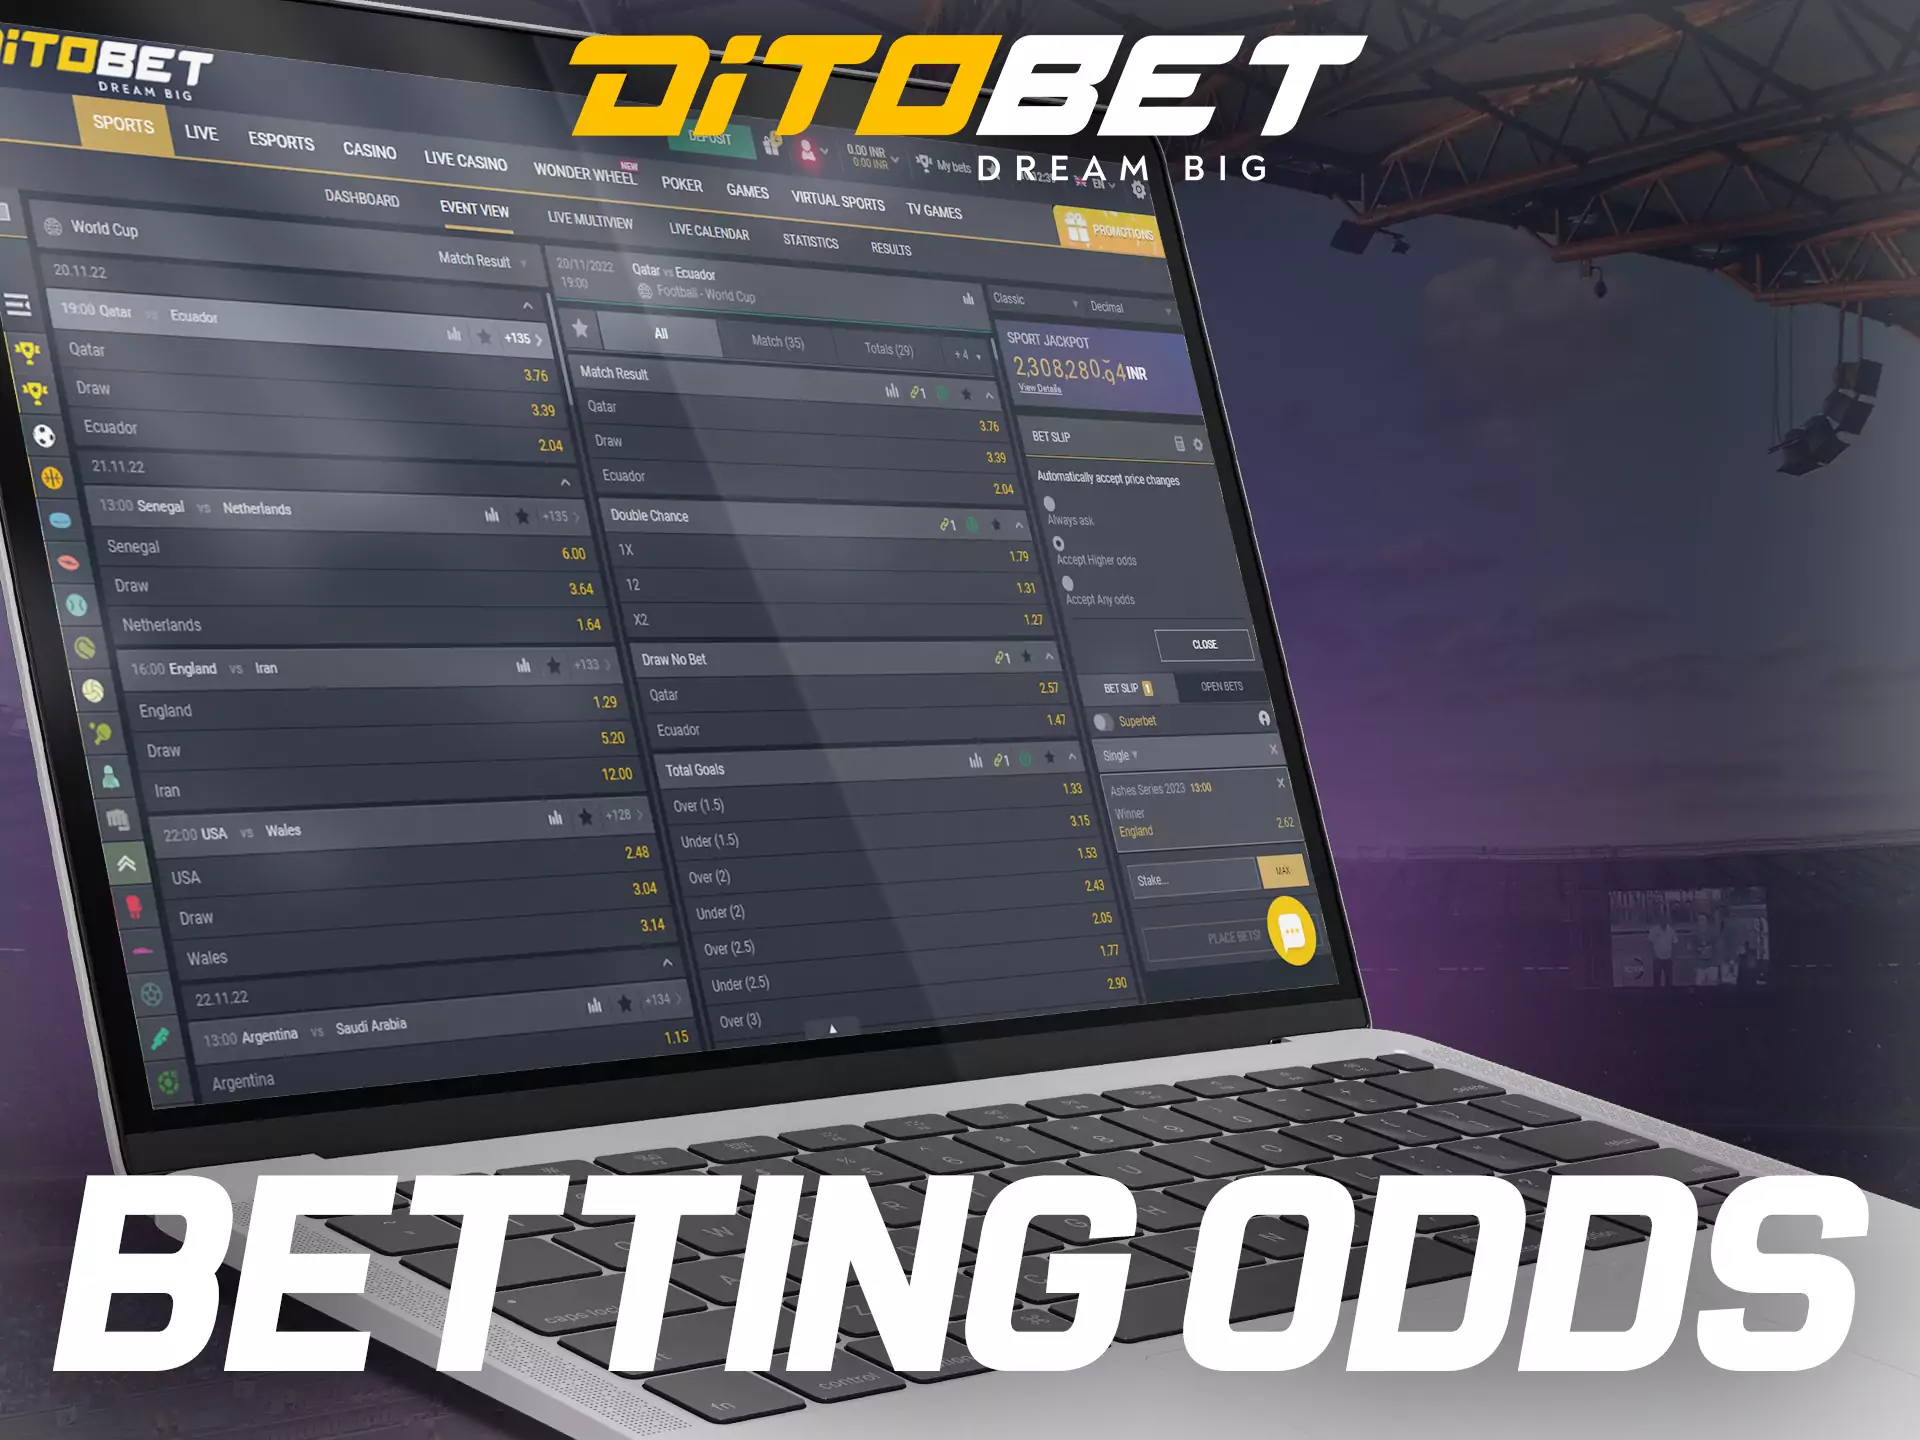 Ditobet offers players special odds for many sporting events.